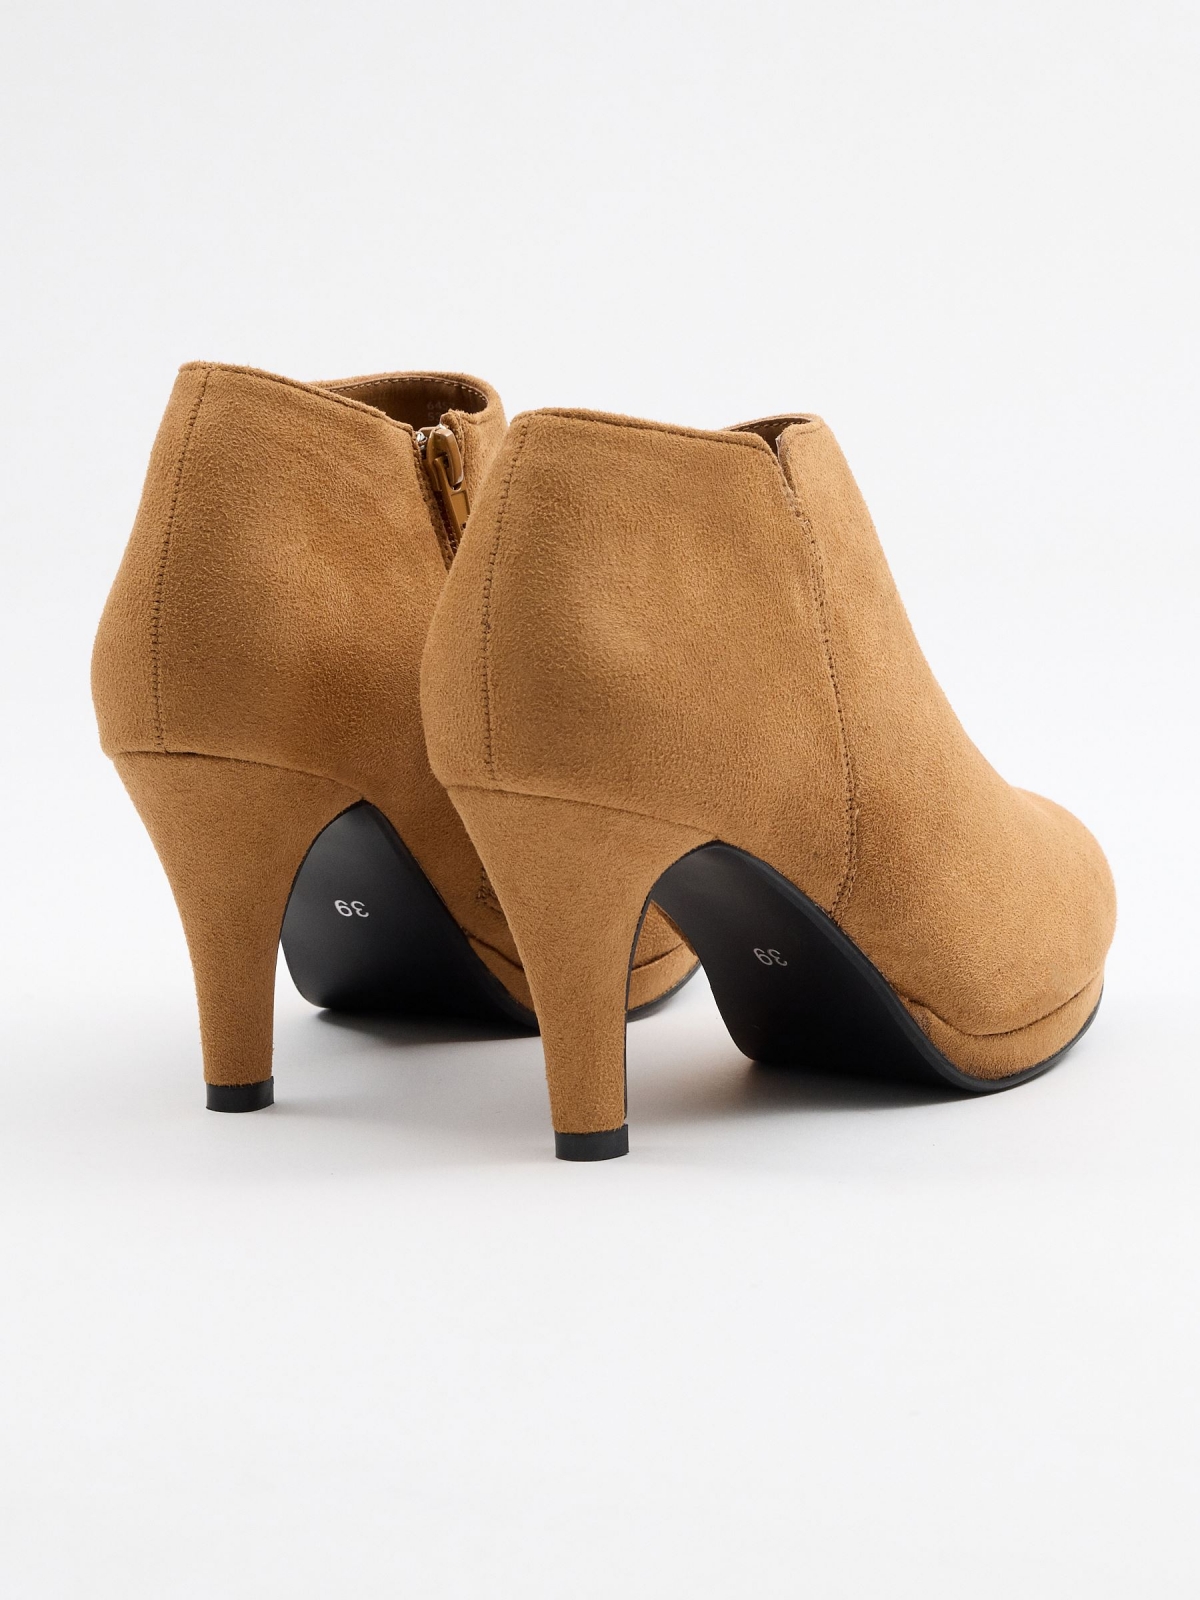 Basic brown ankle boot sand 45º back view